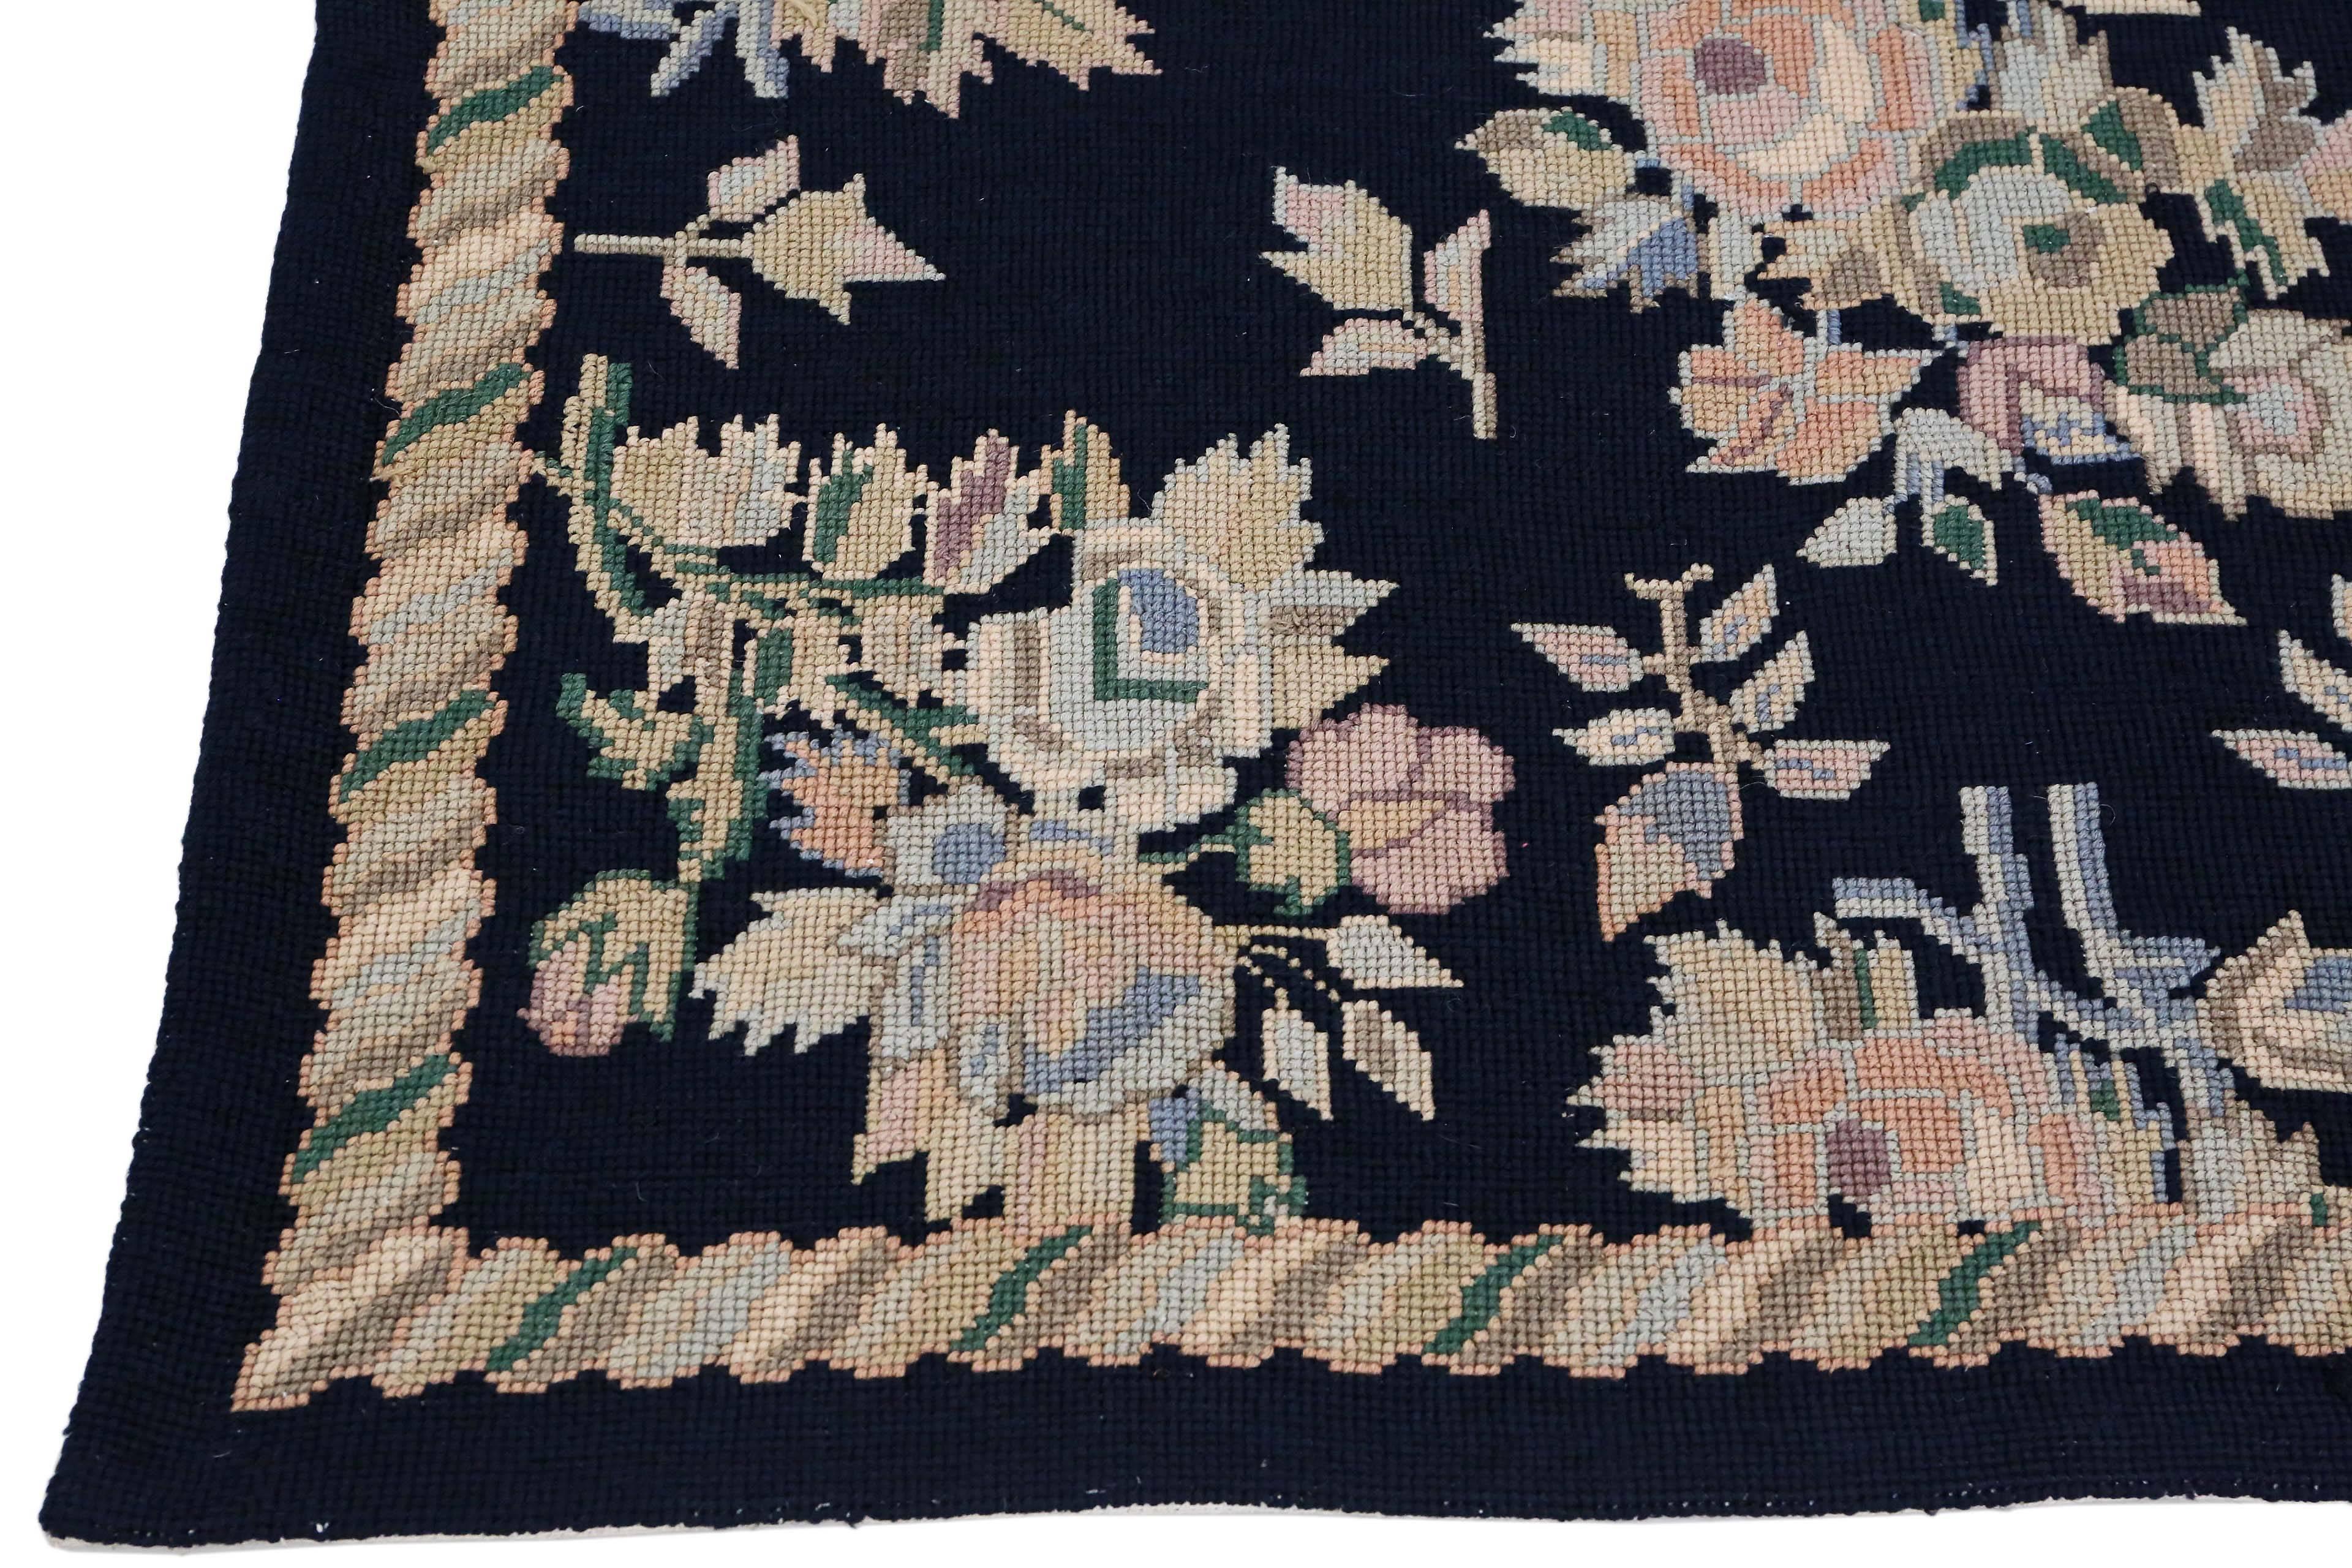 Antique Large Quality William Morris Style Needlepoint Rug Carpet In Good Condition For Sale In Wisbech, Walton Wisbech